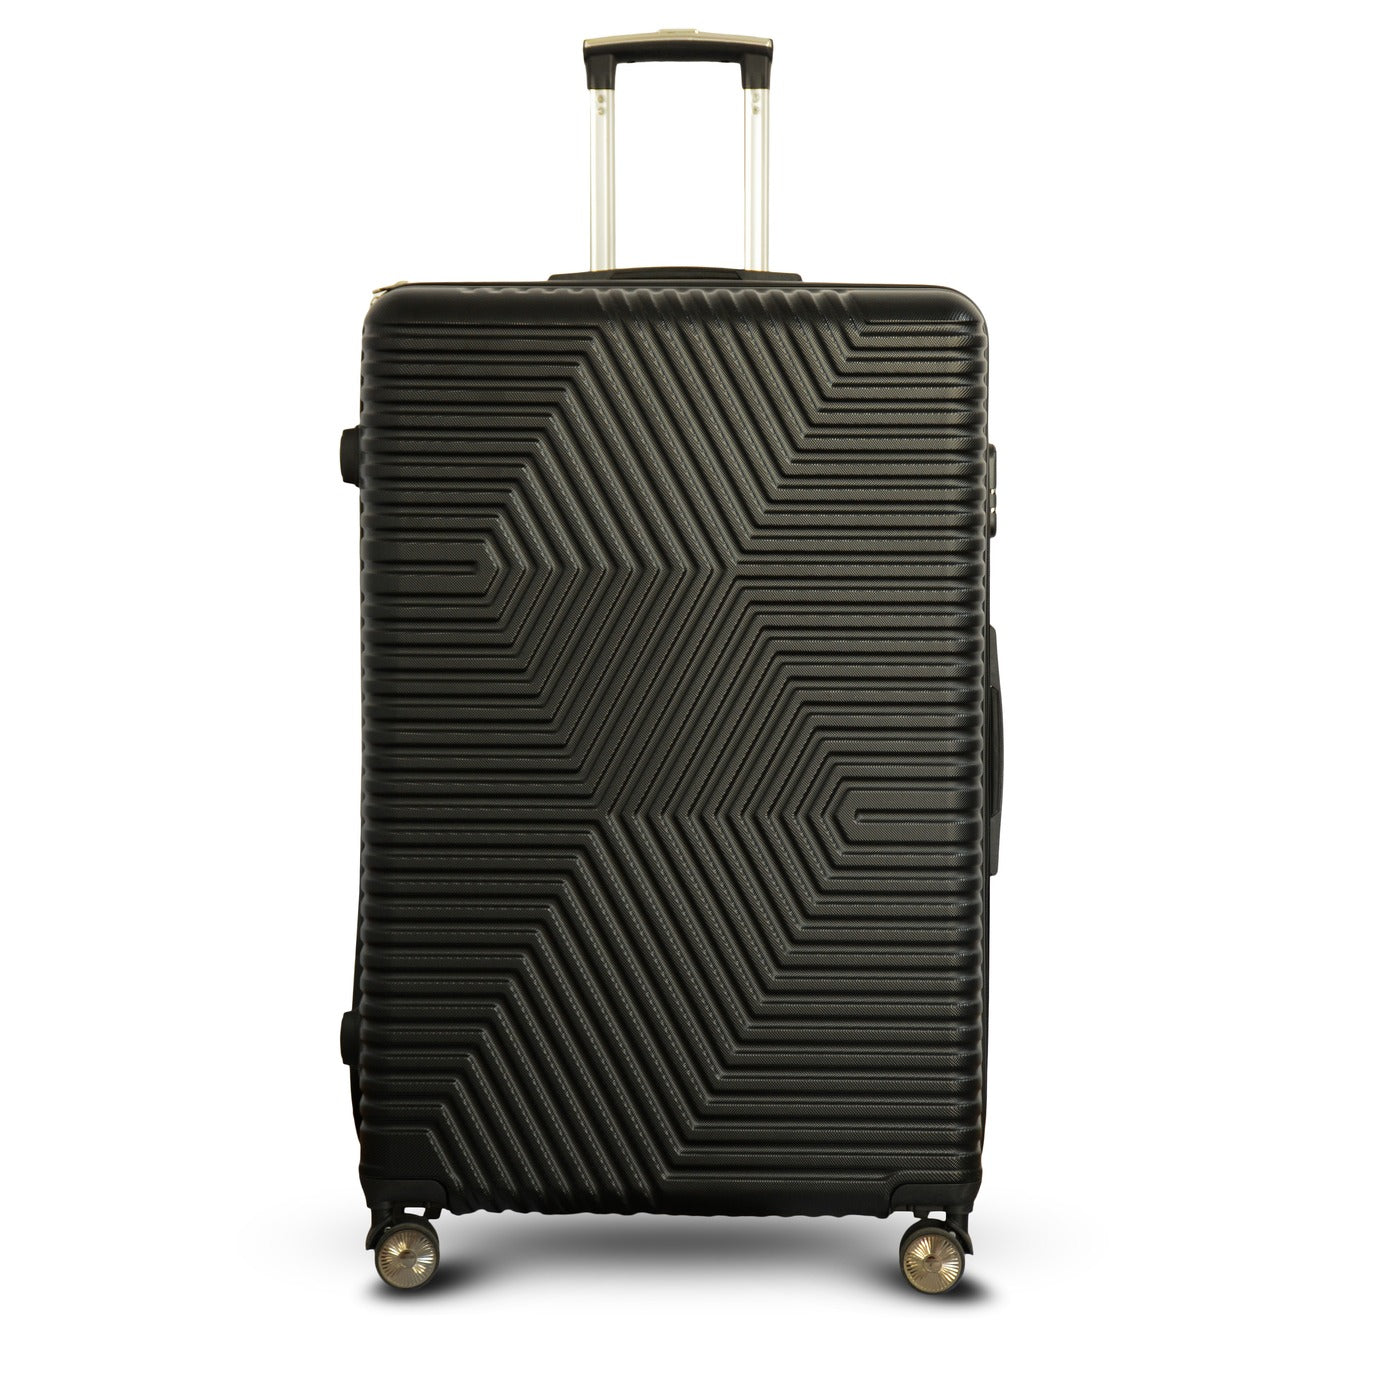  Black Colour Zig Zag ABS Lightweight Luggage Bag With Double Spinner Wheel Zaappy